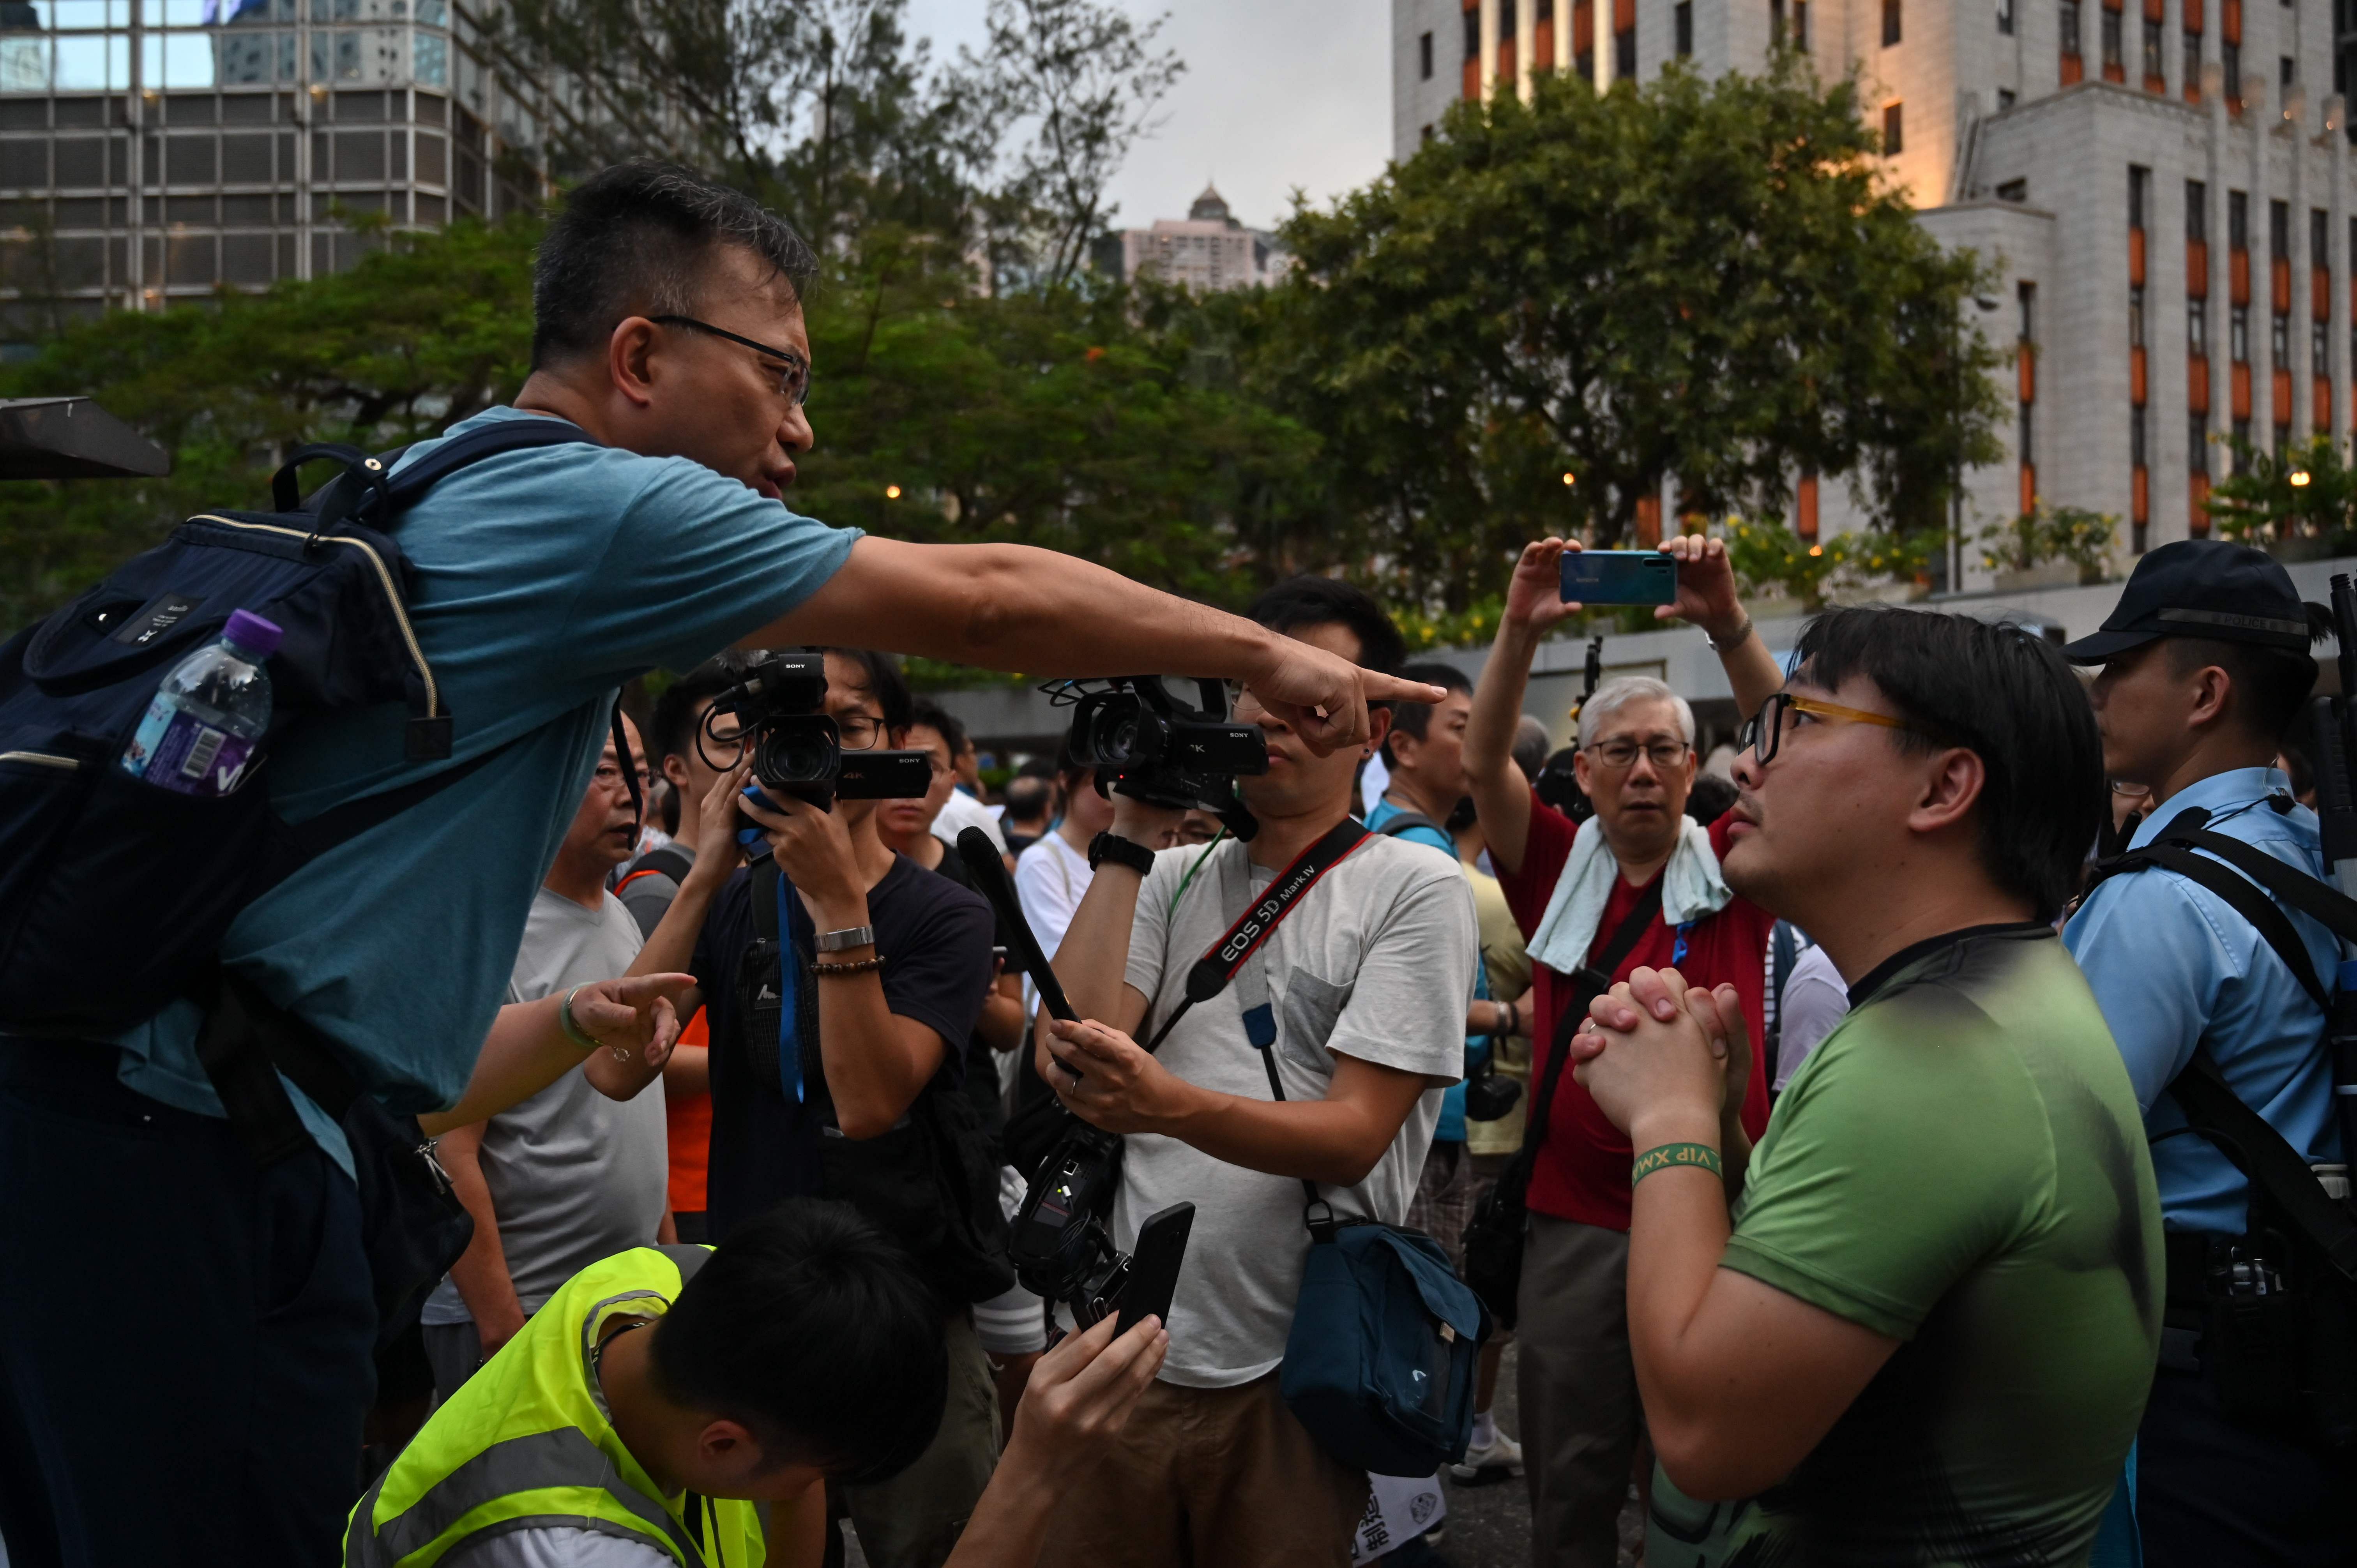 People attend a rally to show their support to the local police force in Honk Kong in Hong Kong on June 22, 2019. - Hong Kong police on June 22 slammed anti-government protesters for besieging their headquarters, calling the demonstration "illegal and irrational" as they vowed to pursue the ringleaders. Credit: AFP Photo